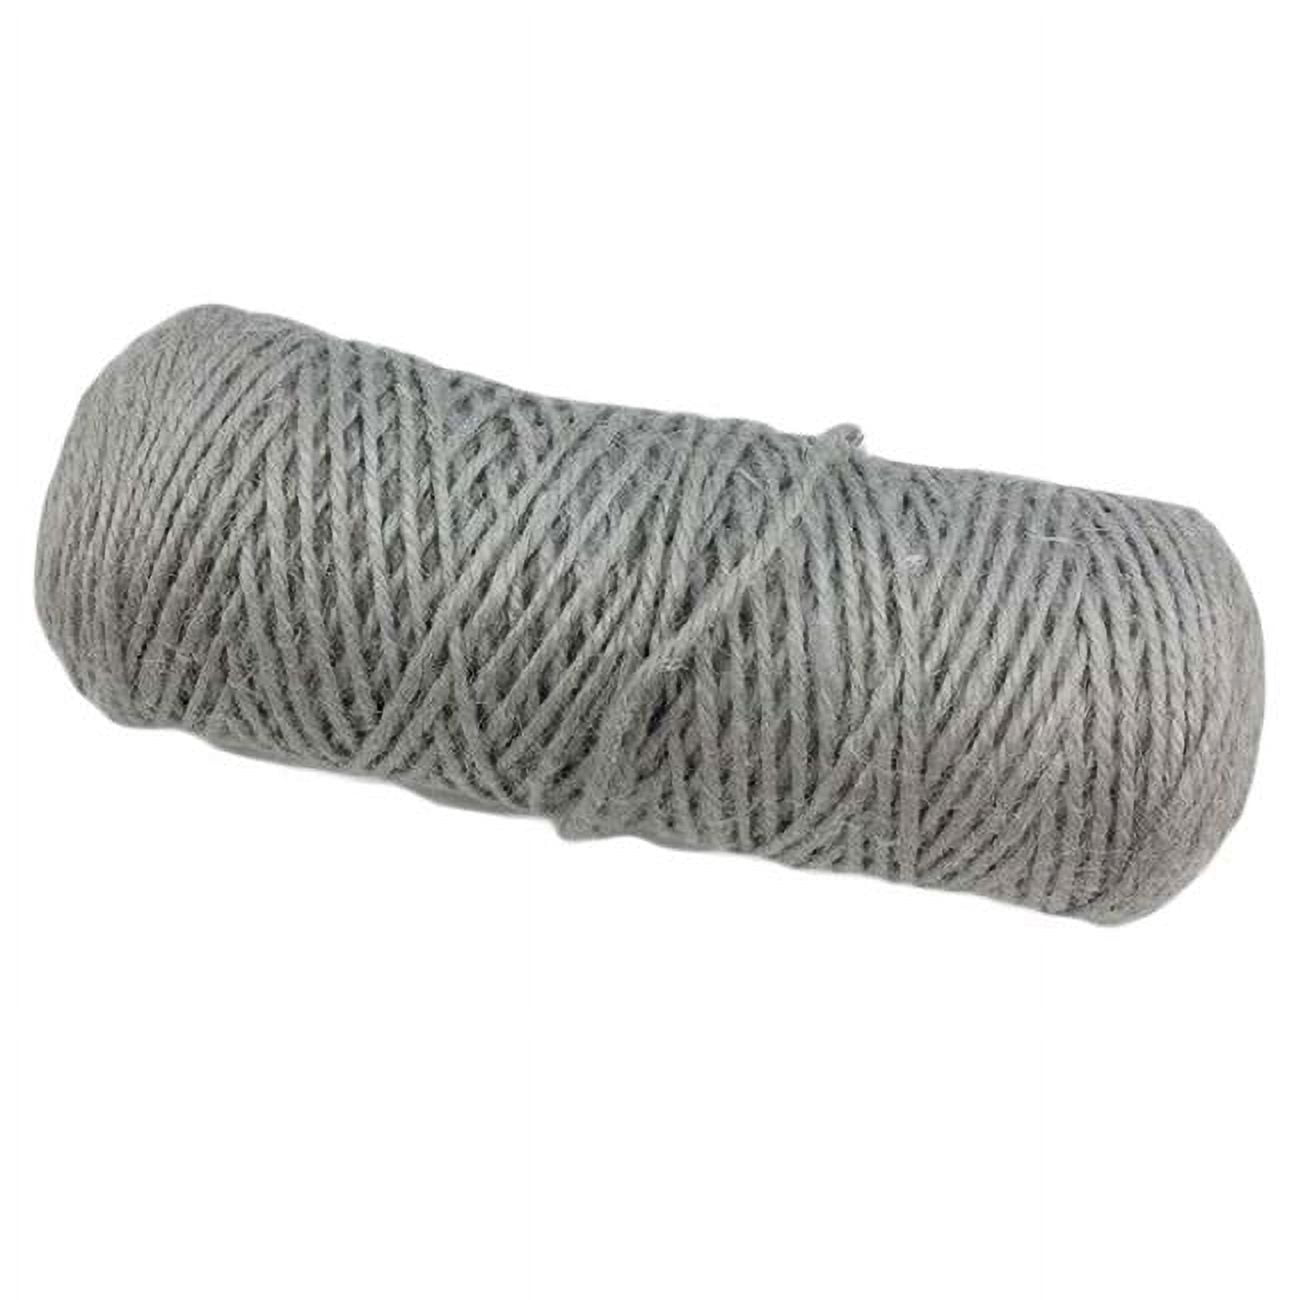 Leisure Arts 4-Ply Natural Floral Jute Rope Cord in Roll - 1LB